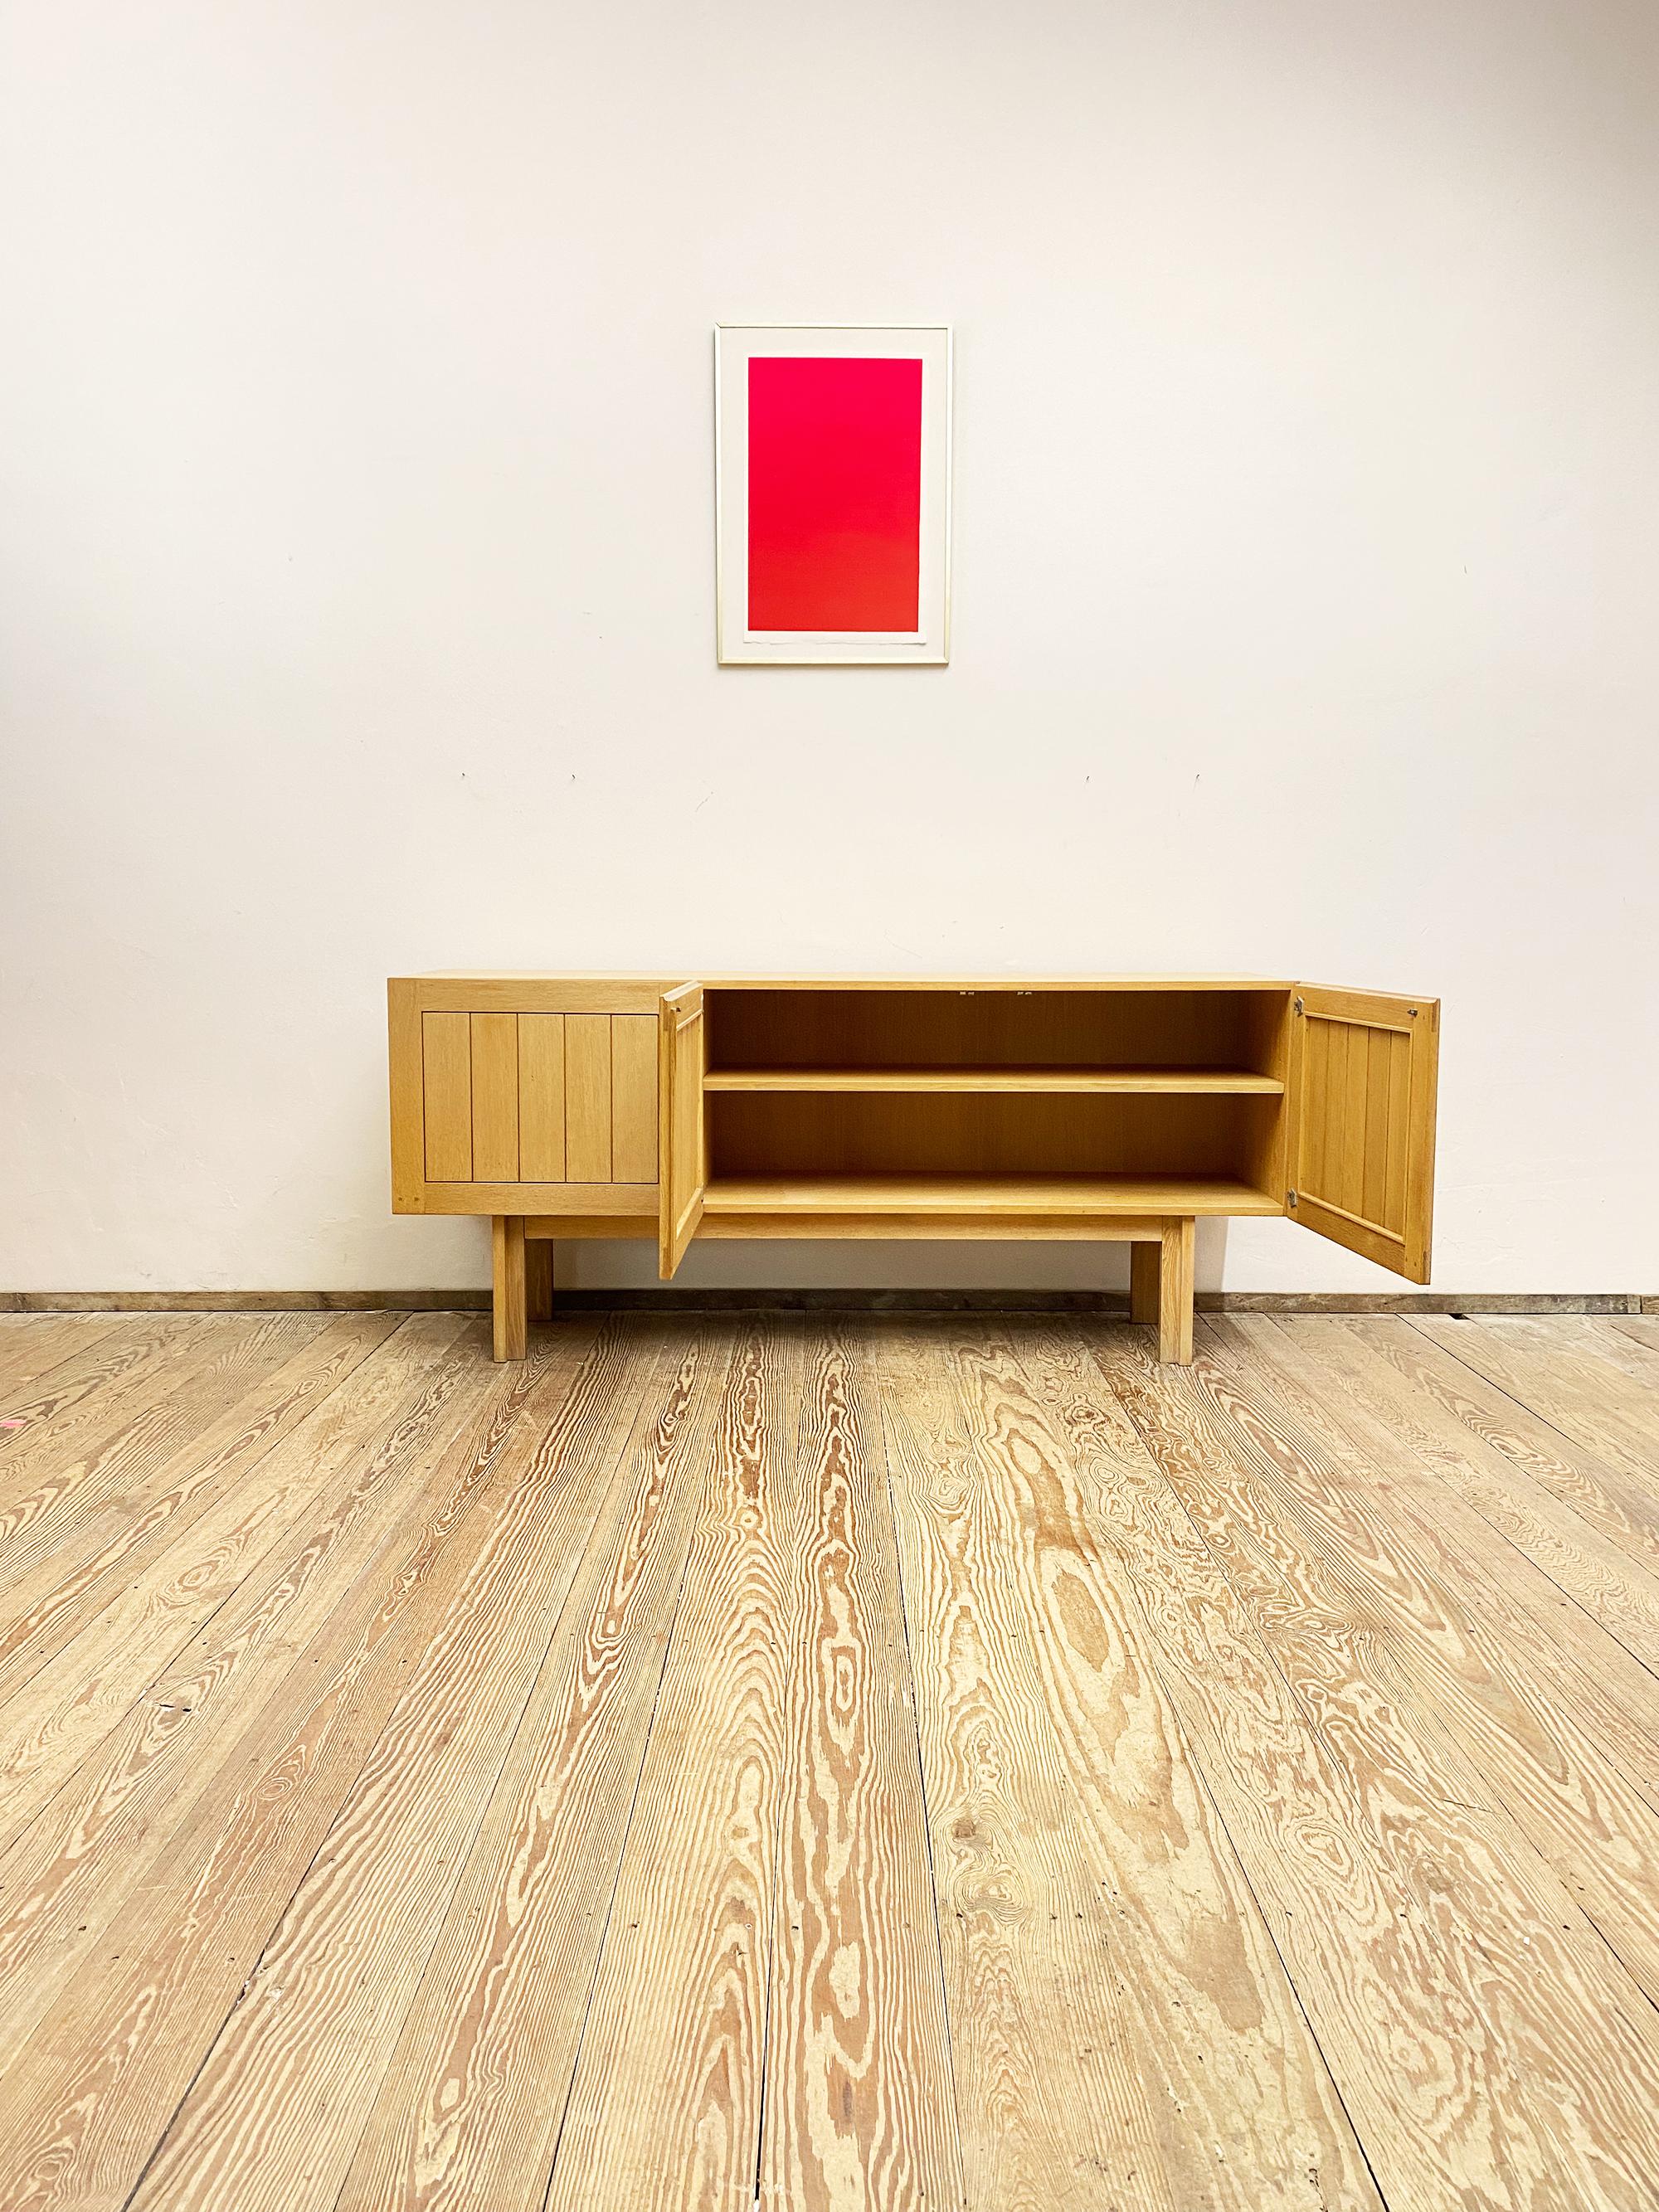 Dimensions 180 x46 x 78 cm (WxDxH)

This Mid-Century Modern oak credenza comes in Scandinavian design but was manufactured in the 1960s in Germany by a Munich based carpentry. 

It shows exquisite German craftsmanship and offers plenty of